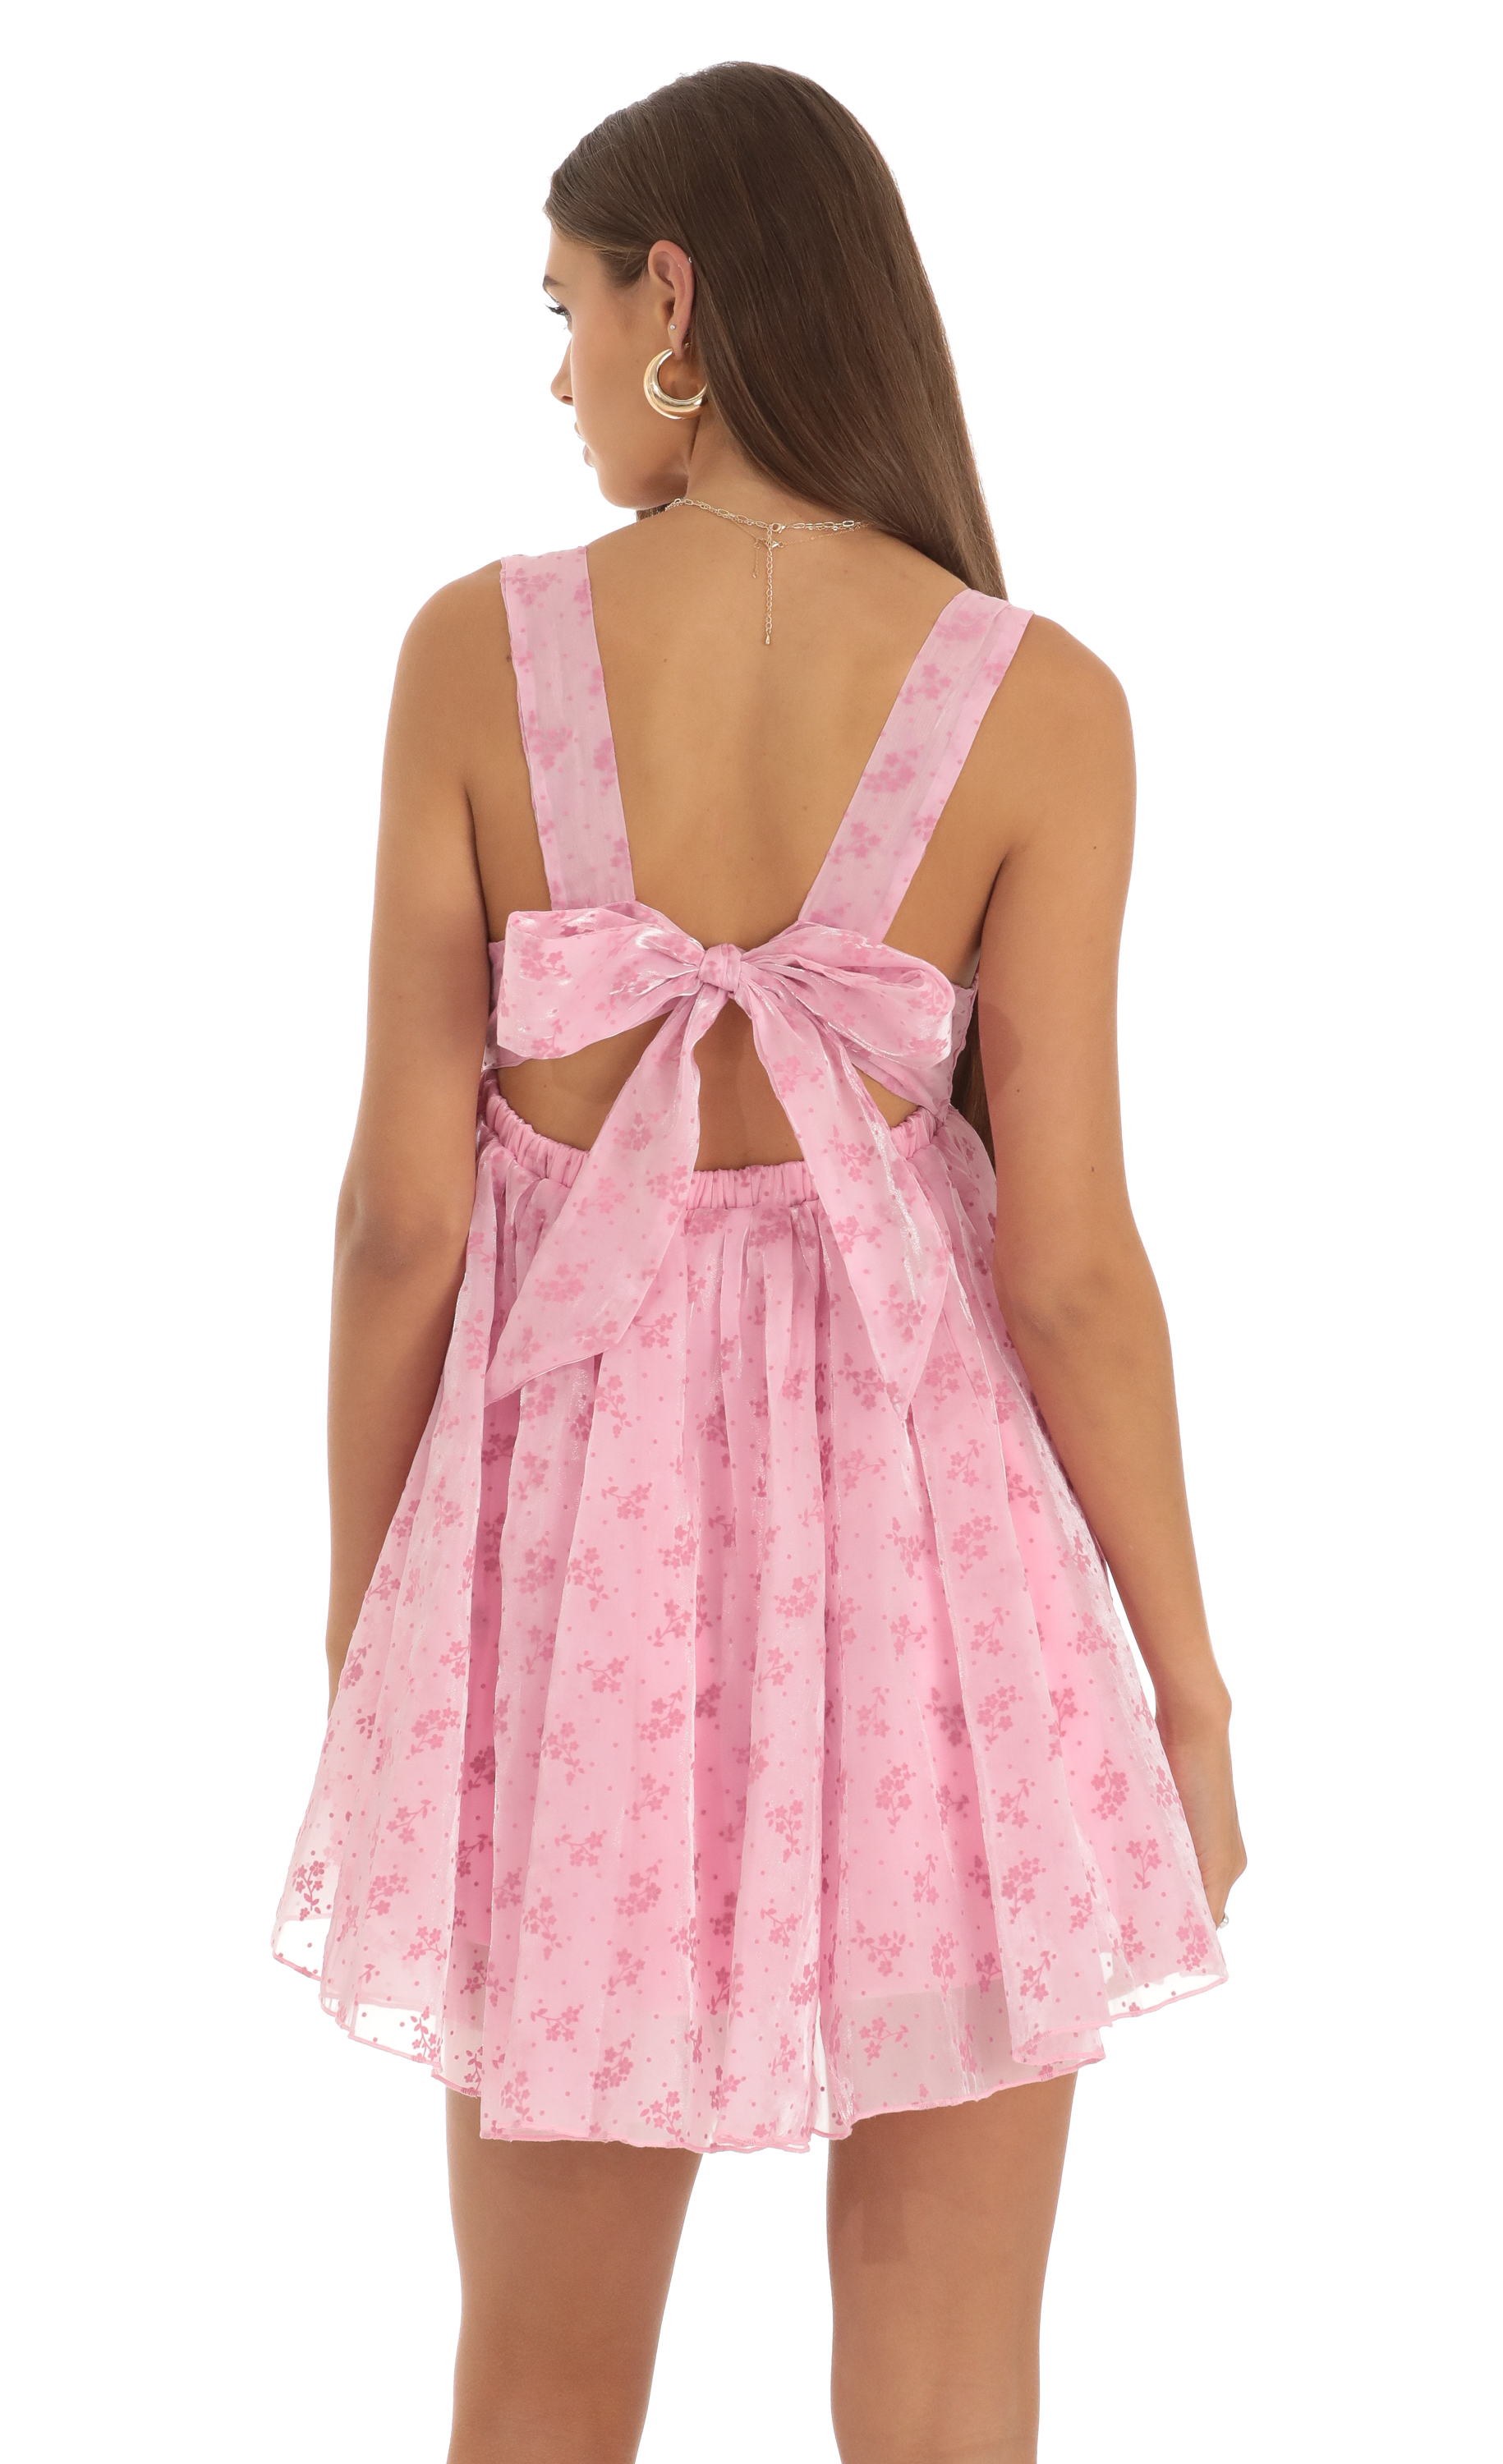 Floral Baby Doll Dress in Pink